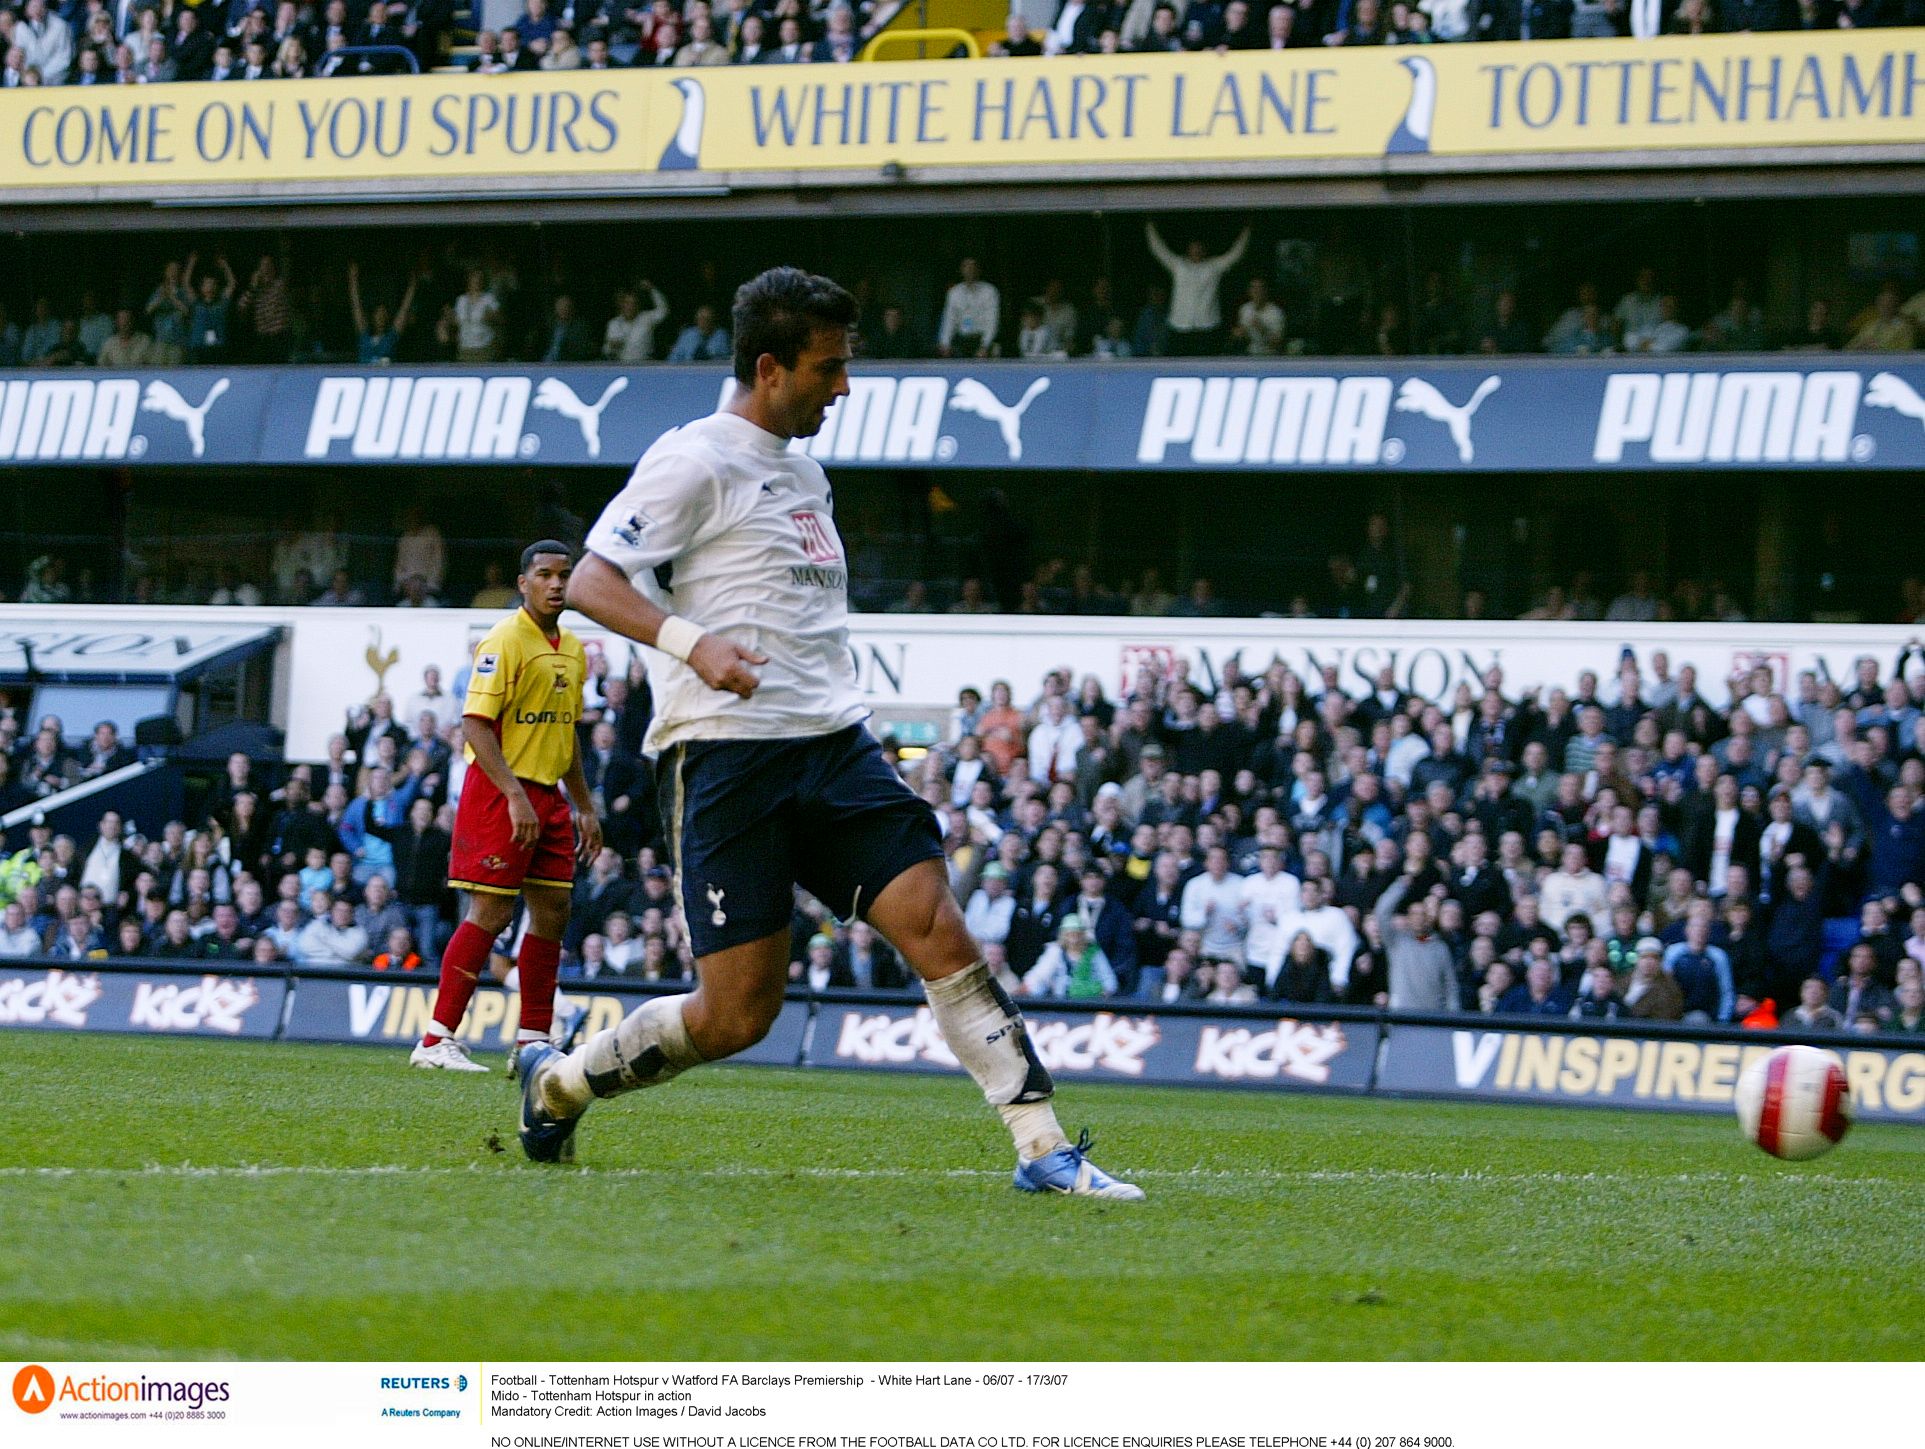 Football - Tottenham Hotspur v Watford FA Barclays Premiership  - White Hart Lane - 06/07 - 17/3/07 
Mido - Tottenham Hotspur in action 
Mandatory Credit: Action Images / David Jacobs 
NO ONLINE/INTERNET USE WITHOUT A LICENCE FROM THE FOOTBALL DATA CO LTD. FOR LICENCE ENQUIRIES PLEASE TELEPHONE +44 (0) 207 864 9000.